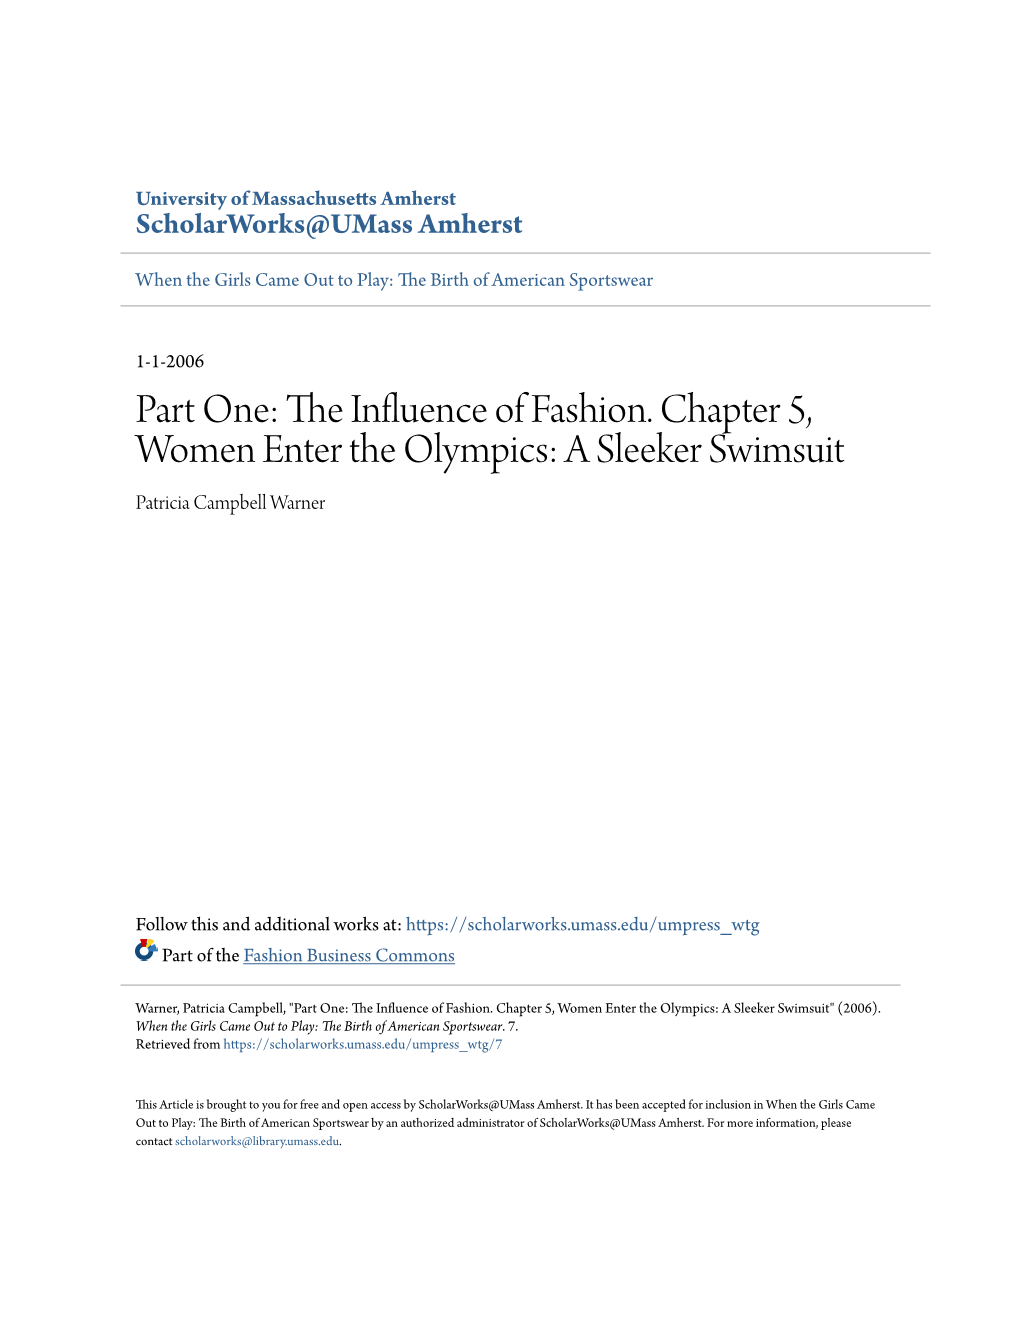 The Influence of Fashion. Chapter 5, Women Enter the Olympics